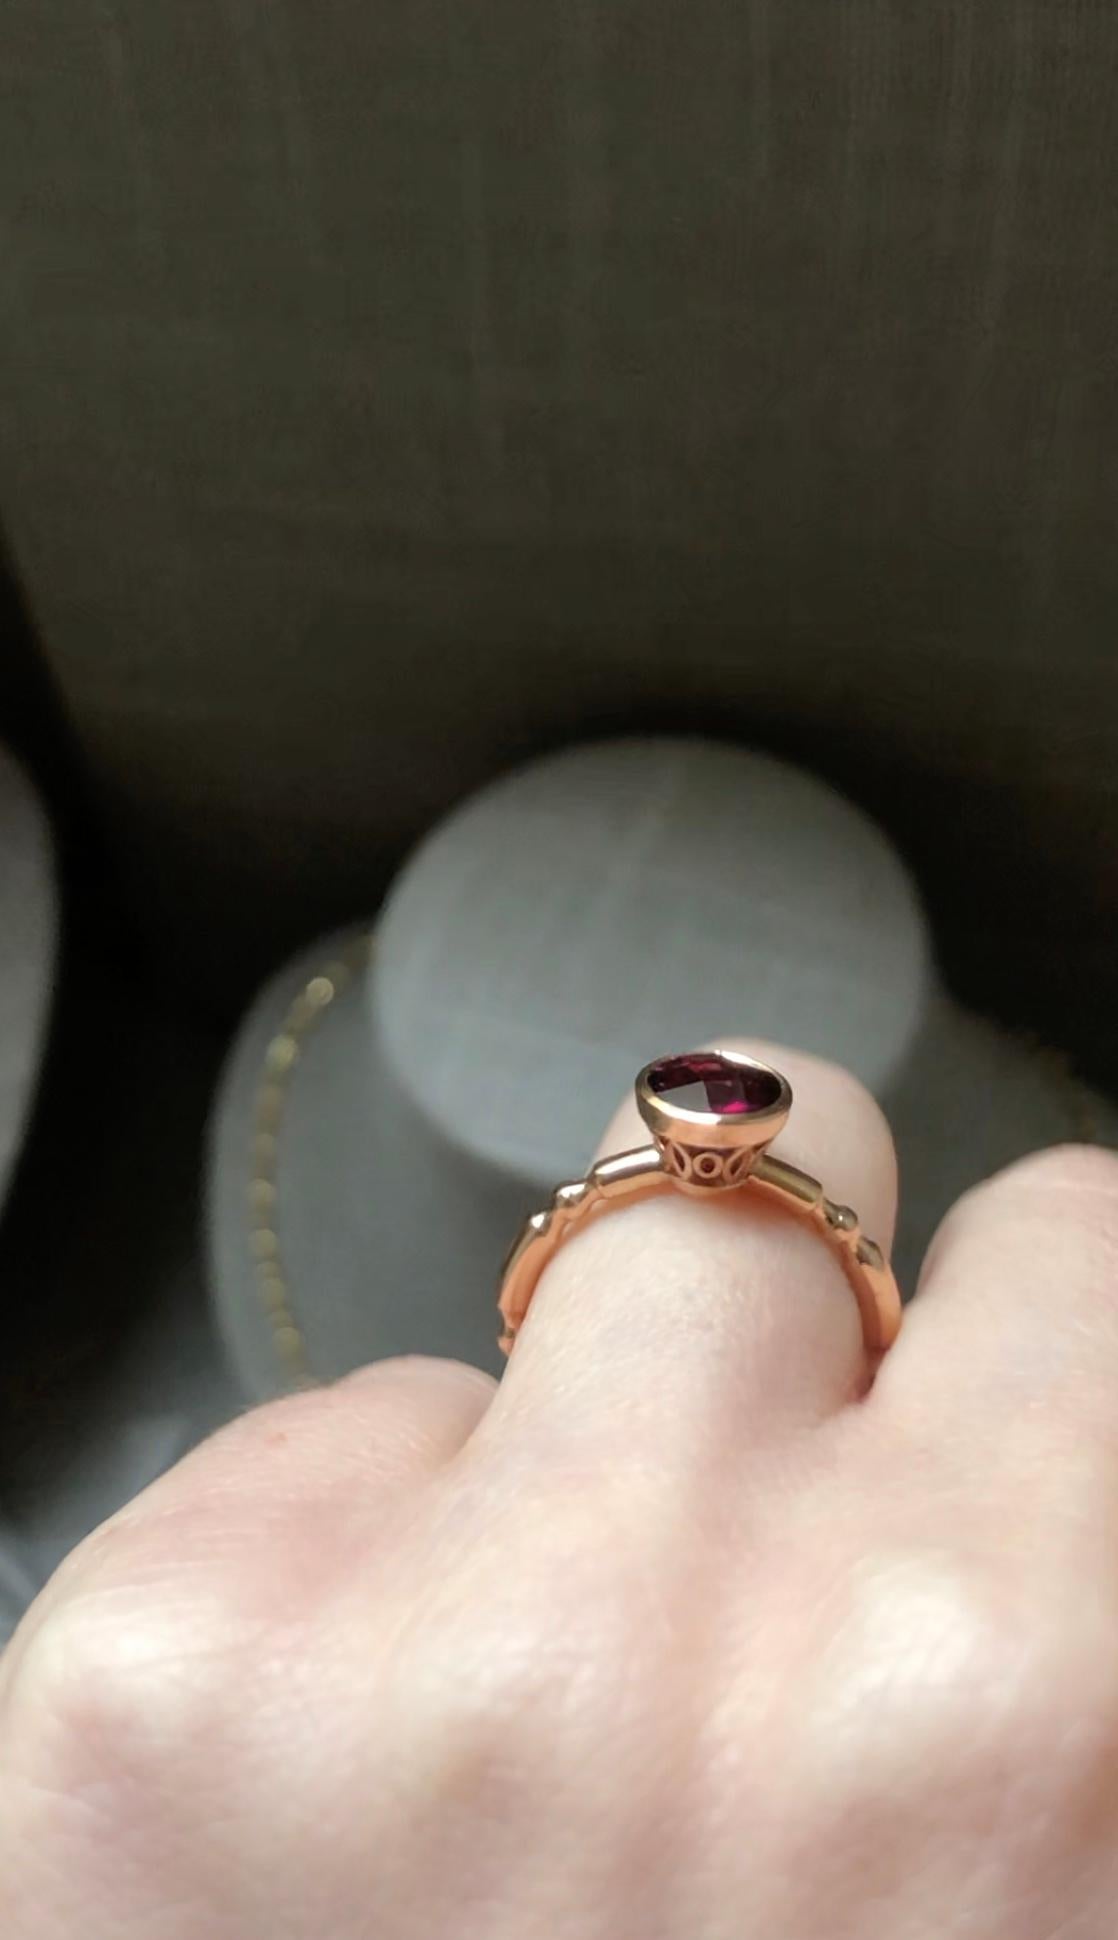 For Sale:  14k Rose Gold Solitaire Engagement Ring with 1.65 Ct Round Red Rhodolite Garnet 7